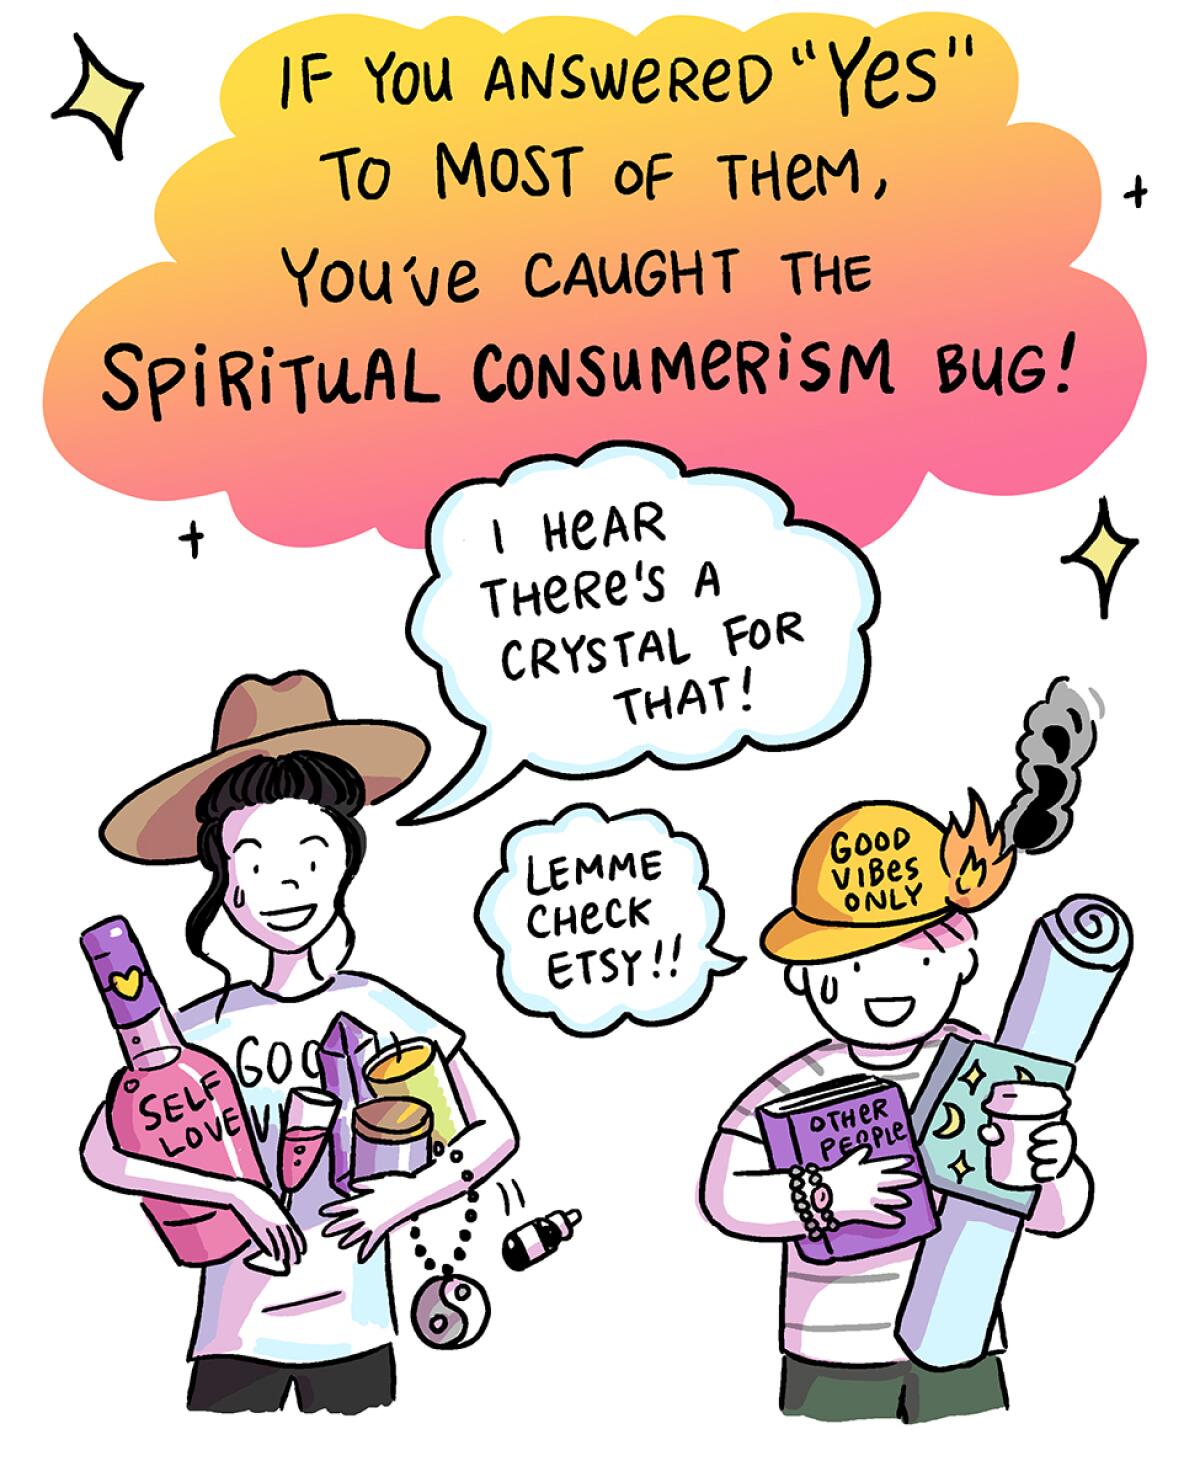 "If you answered 'yes' to most of them you've caught the spiritual consumerism bug!" Two people with arms full of stuff